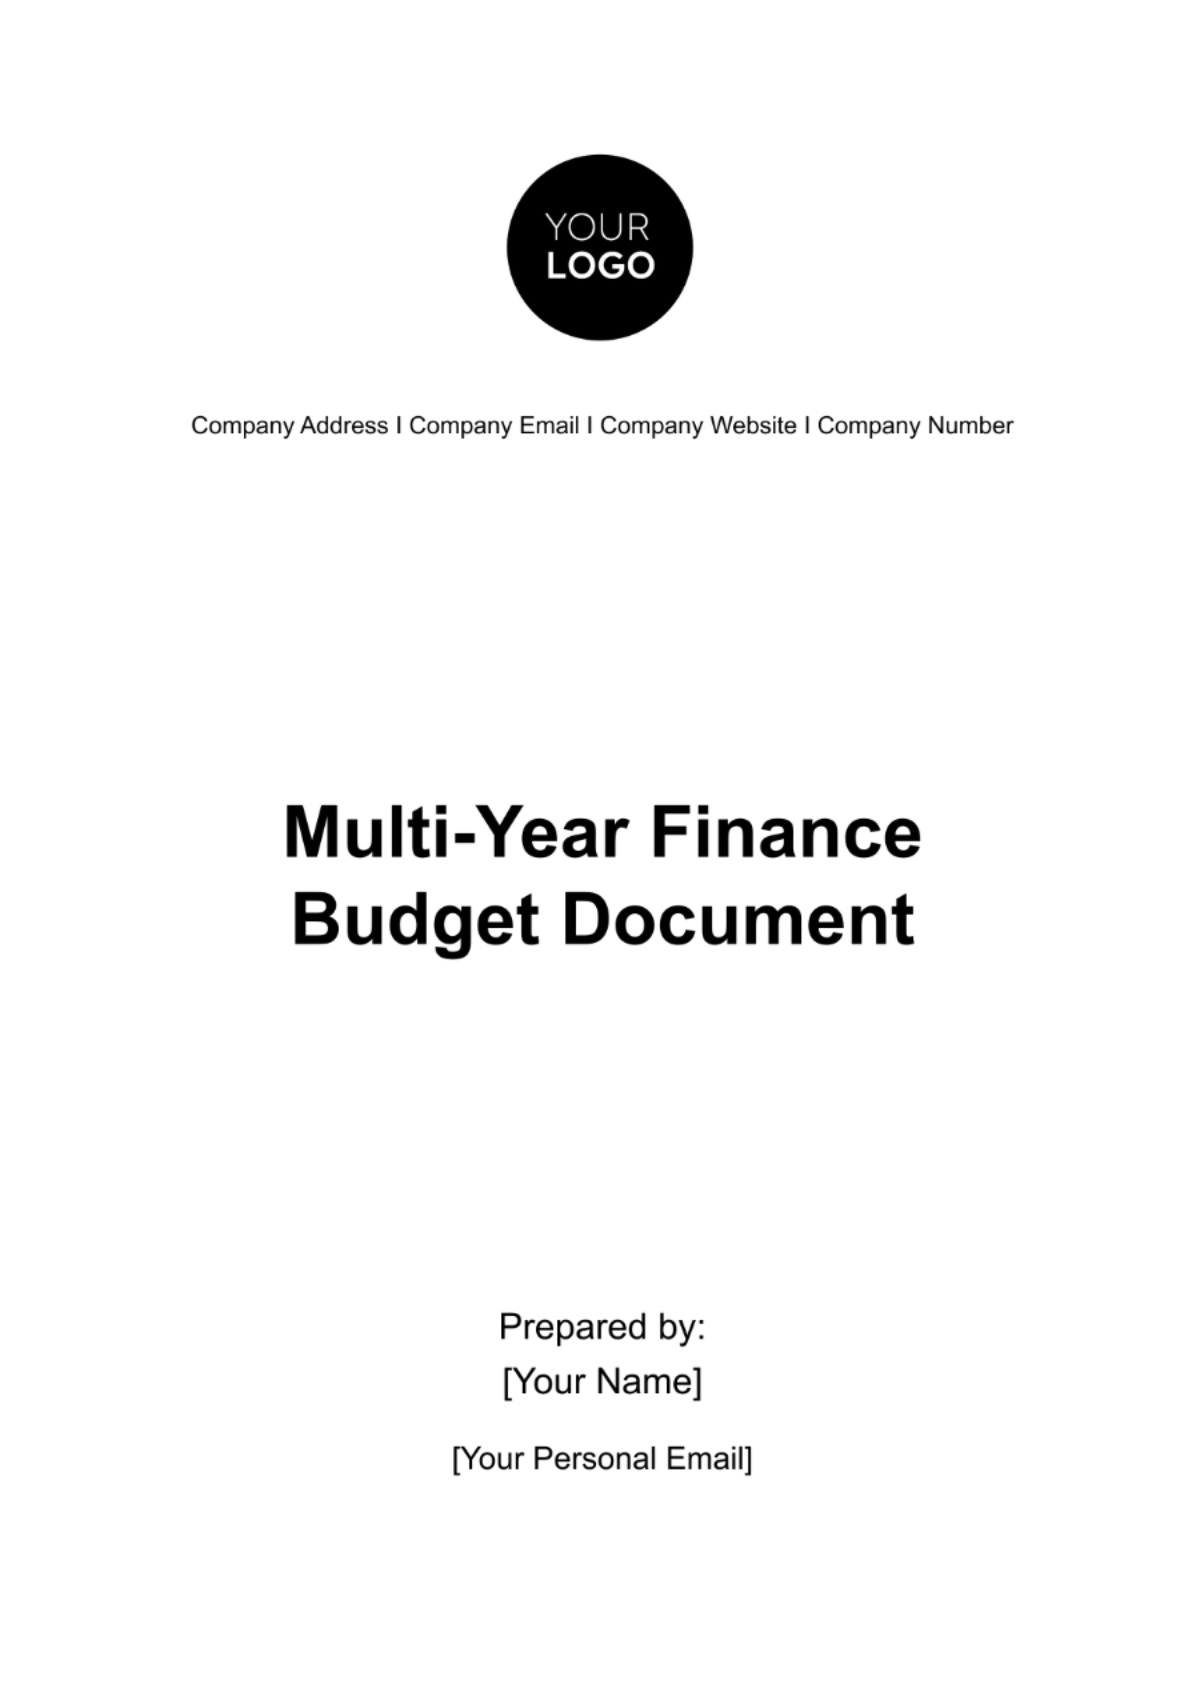 Multi-Year Finance Budget Document Template